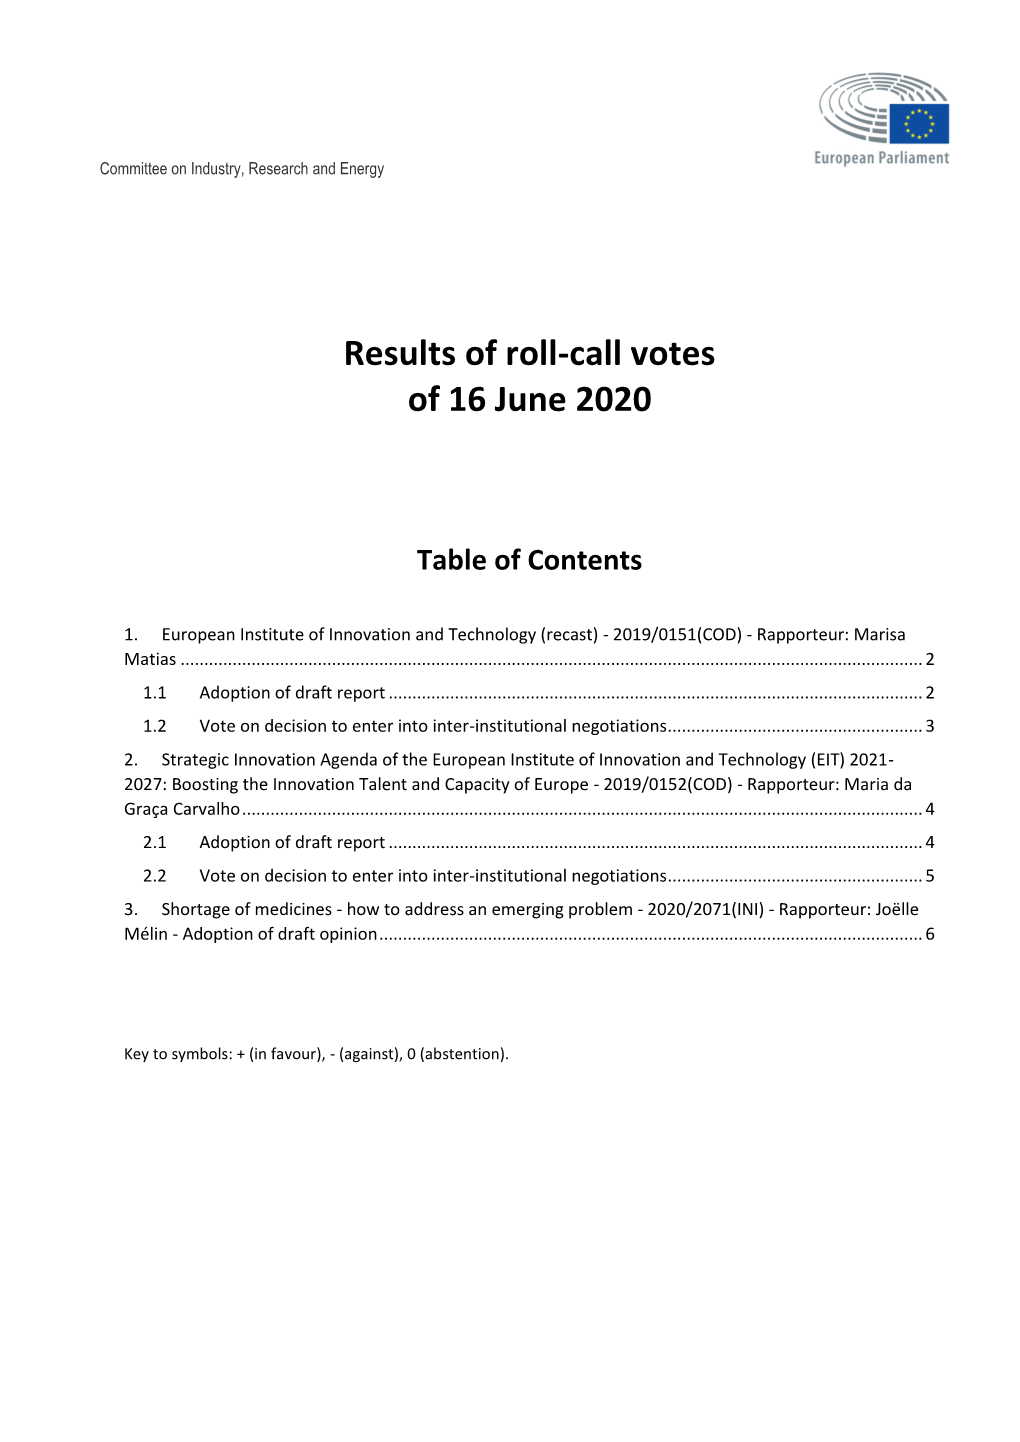 Results of Roll-Call Votes of 16 June 2020